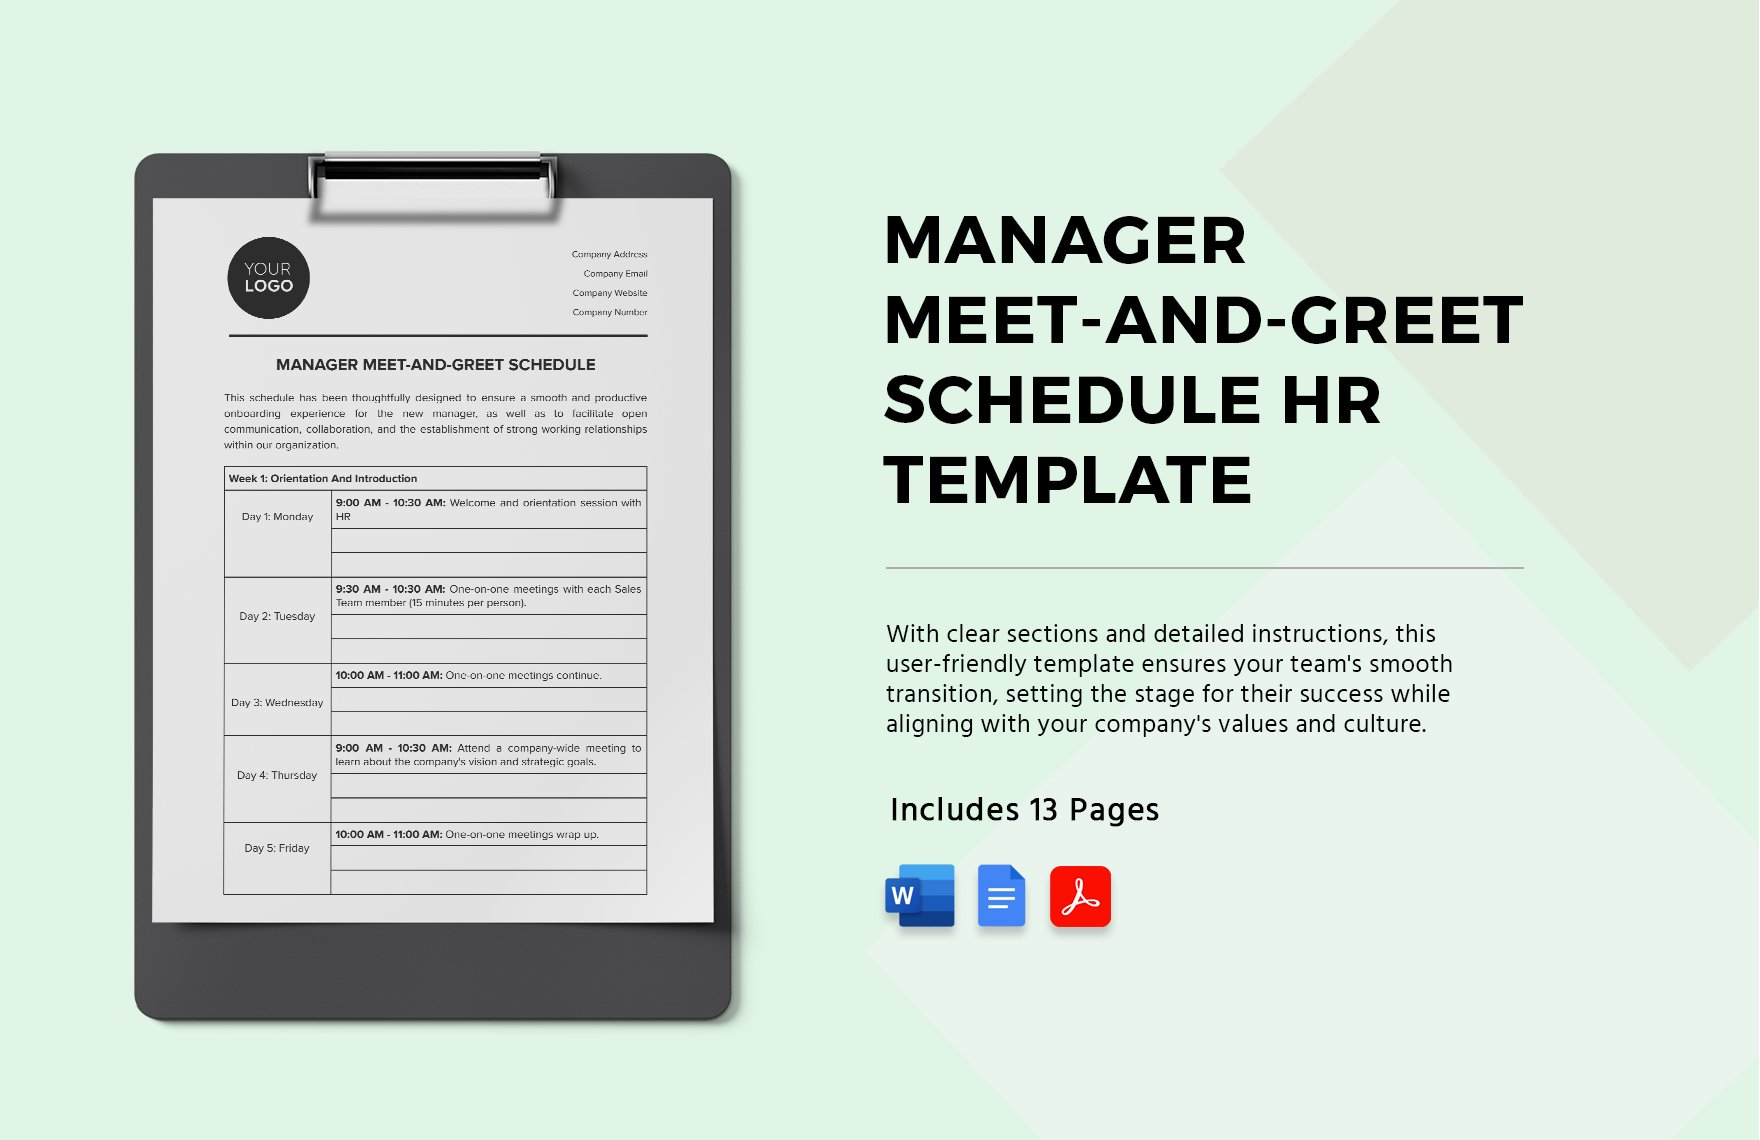 Manager Meet-and-Greet Schedule HR Template in Word, Google Docs, PDF